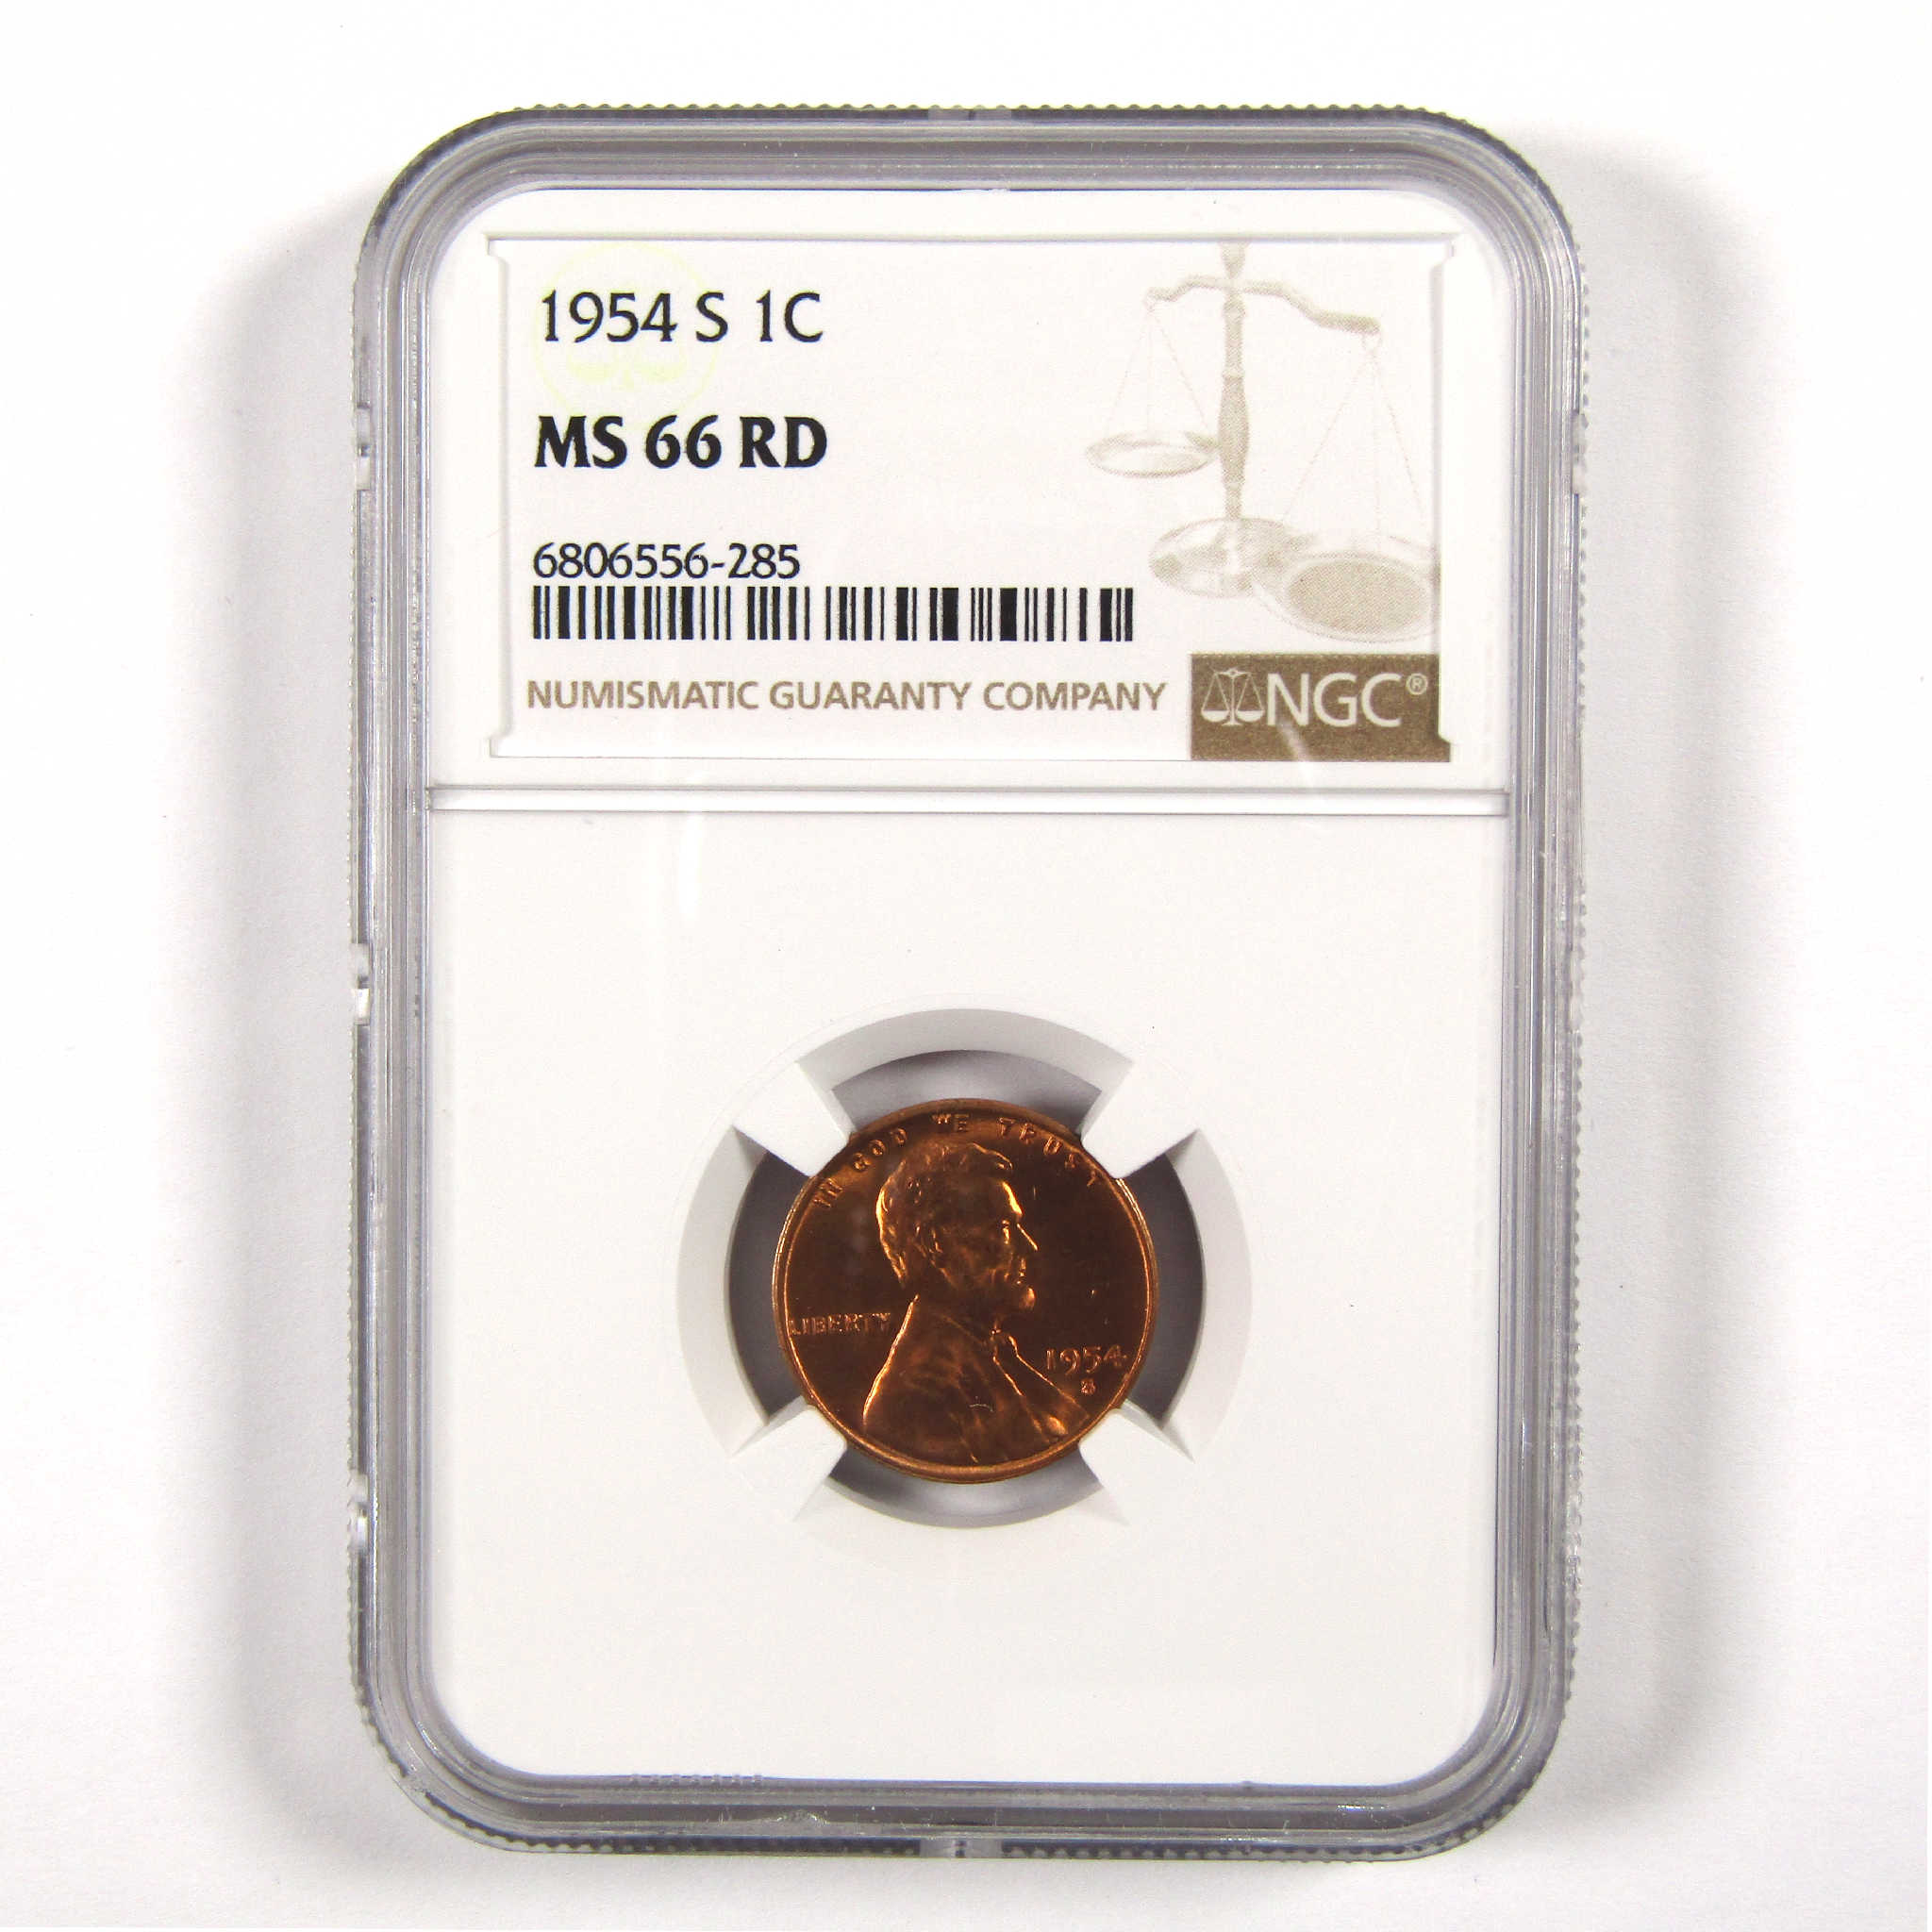 1954 S Lincoln Wheat Cent MS 66 RD NGC Penny 1c Unc SKU:I11567